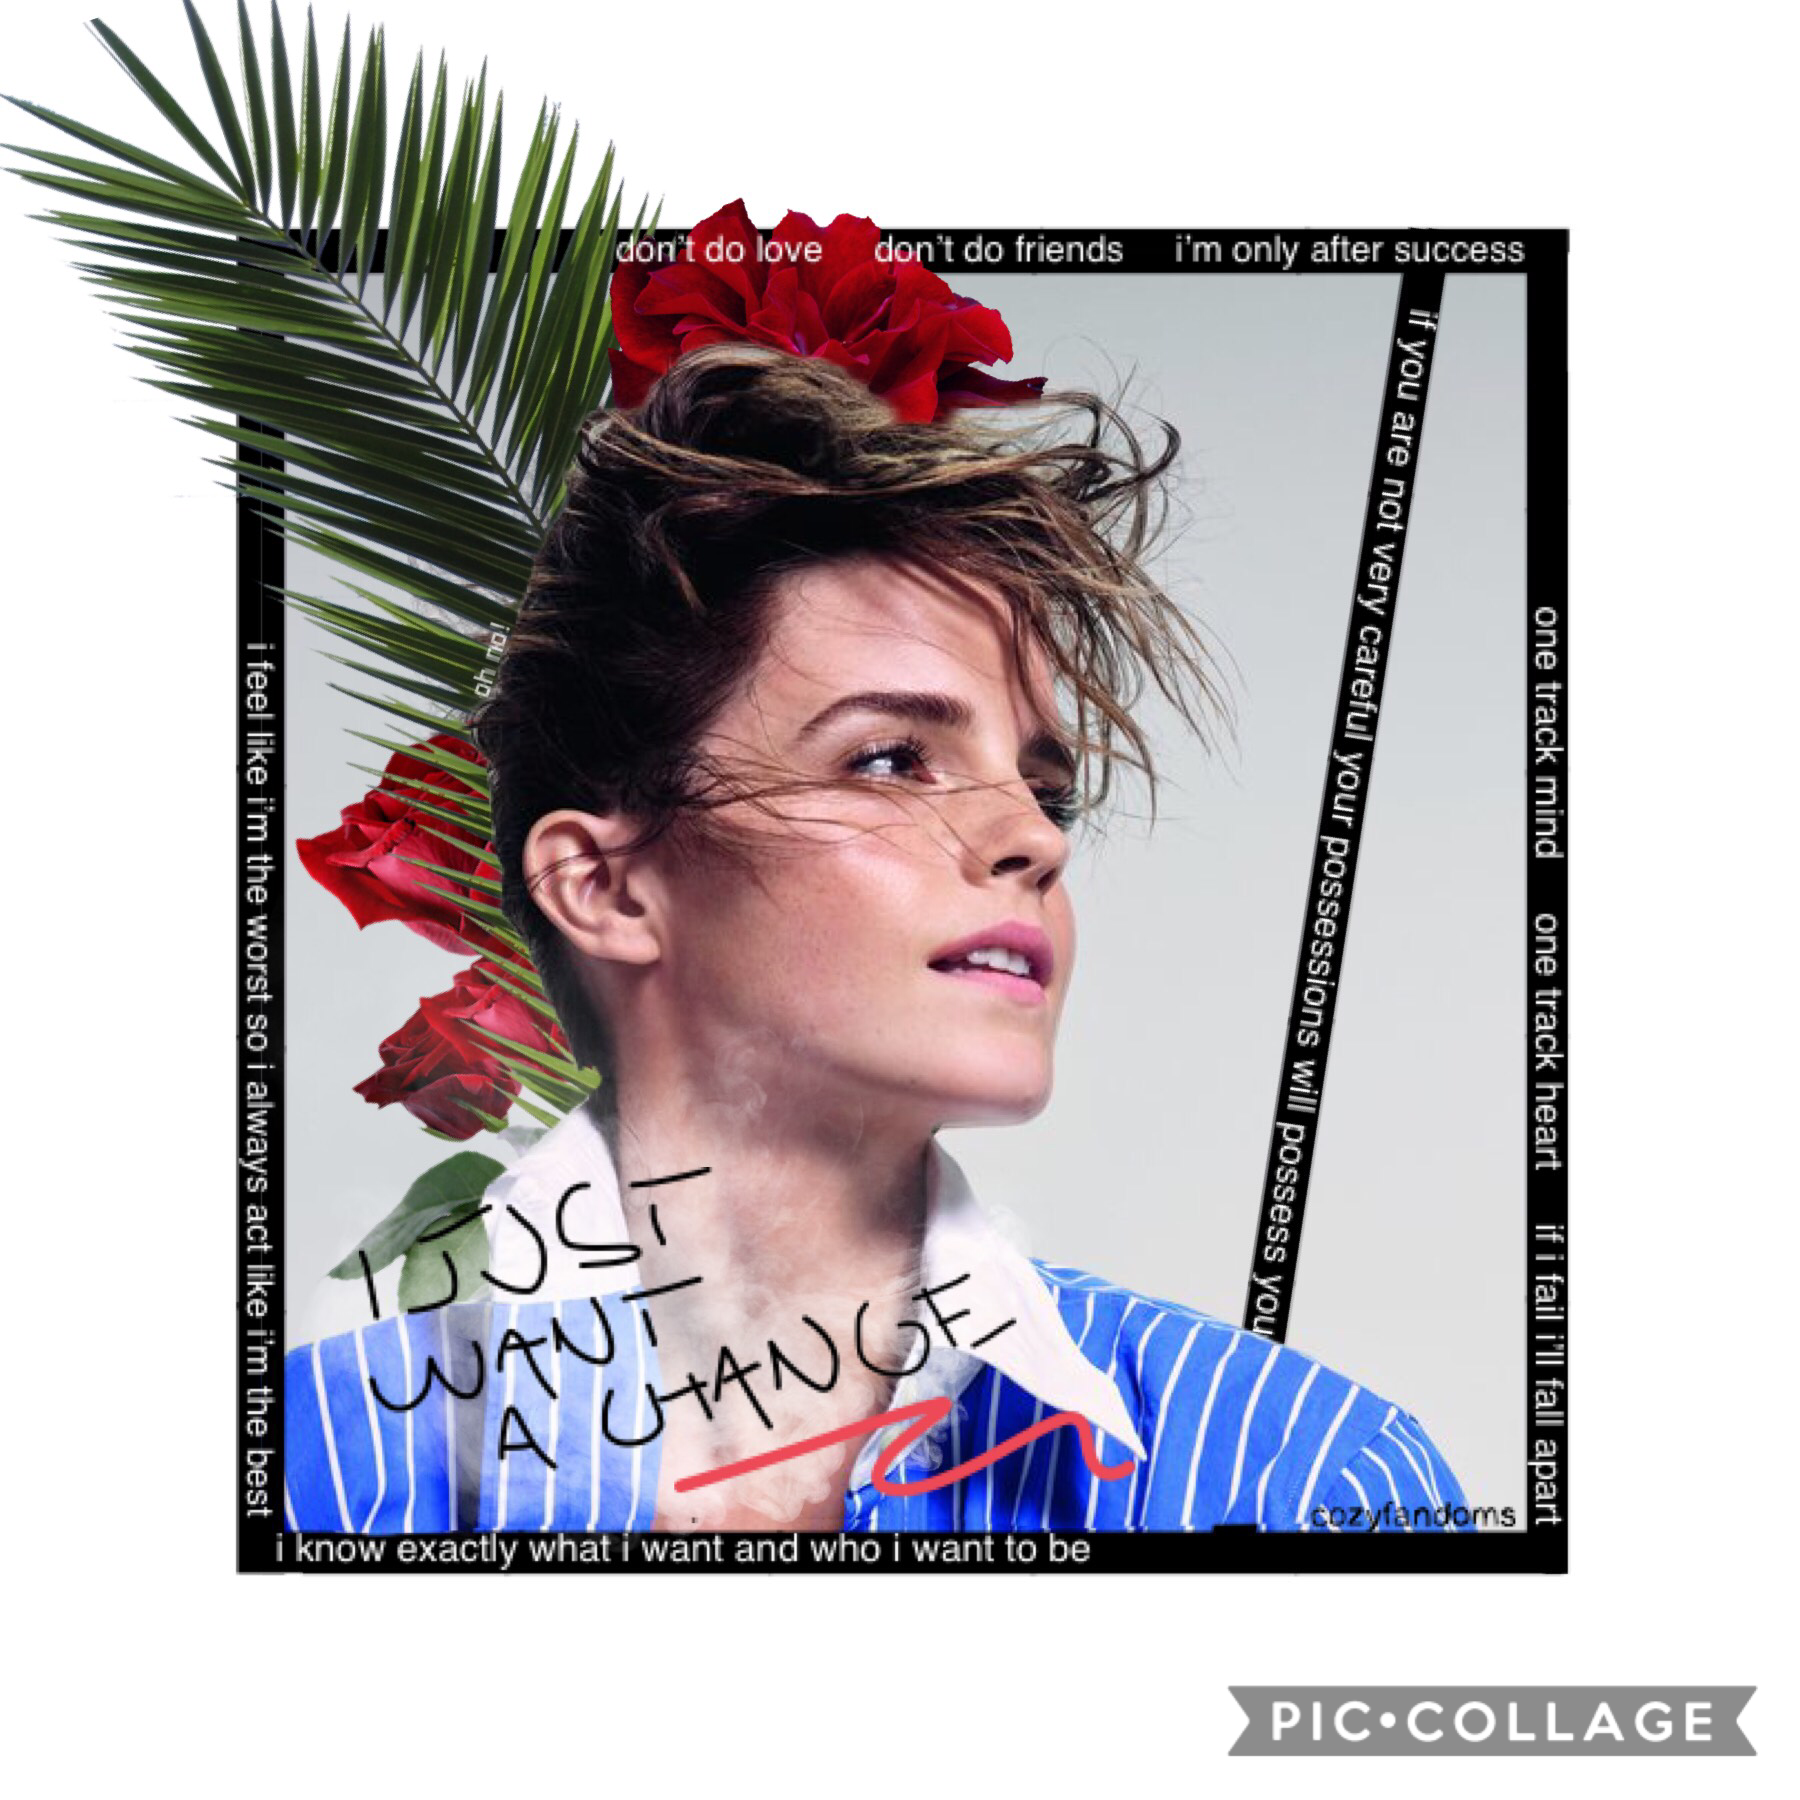 8/14/18
Ever since I started this account I wanted to do a Marina/Emma Watson edit. So here it is! Also yesterday I had a very fun sleepover with some close friends that I won’t see much during the school year! Yay!